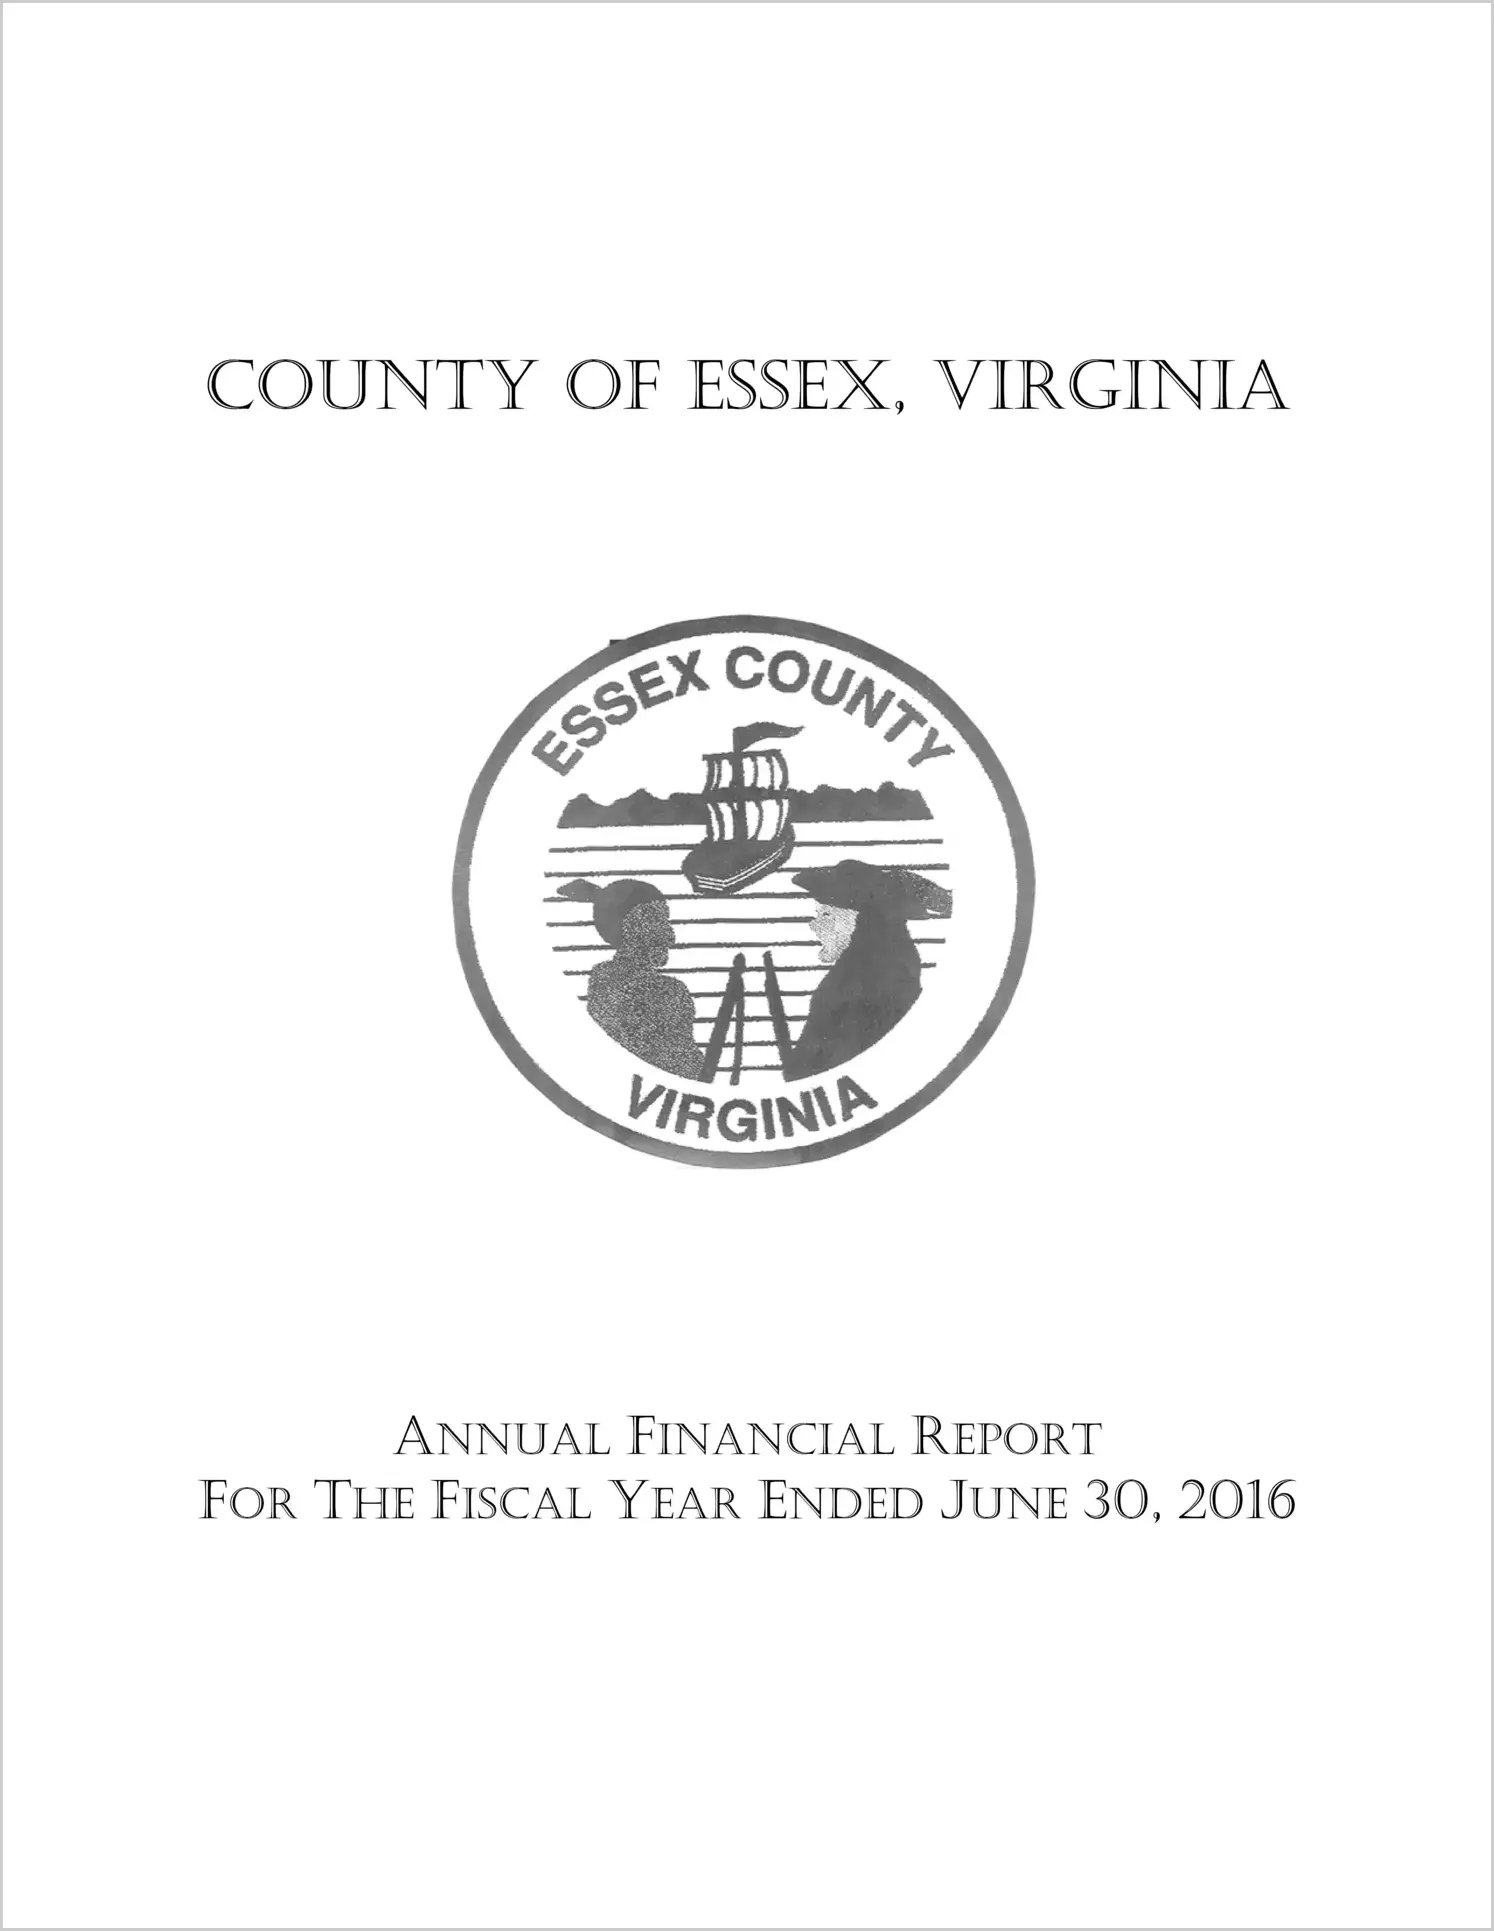 2016 Annual Financial Report for County of Essex